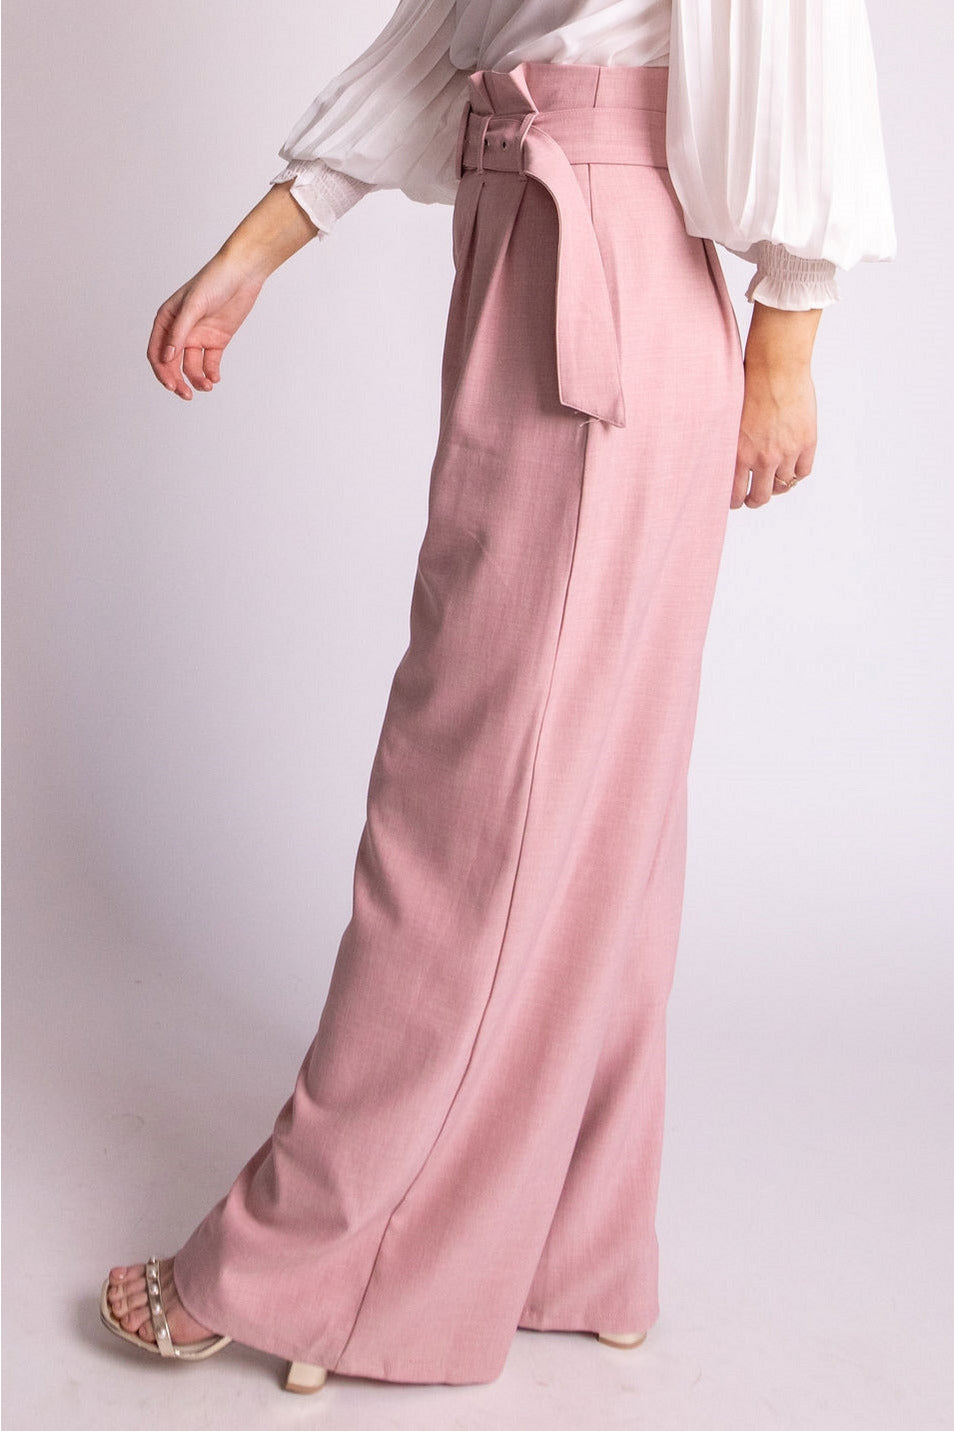 Rosé Paperbag Wide Leg Pleated Trouser - Expressive Collective CO.